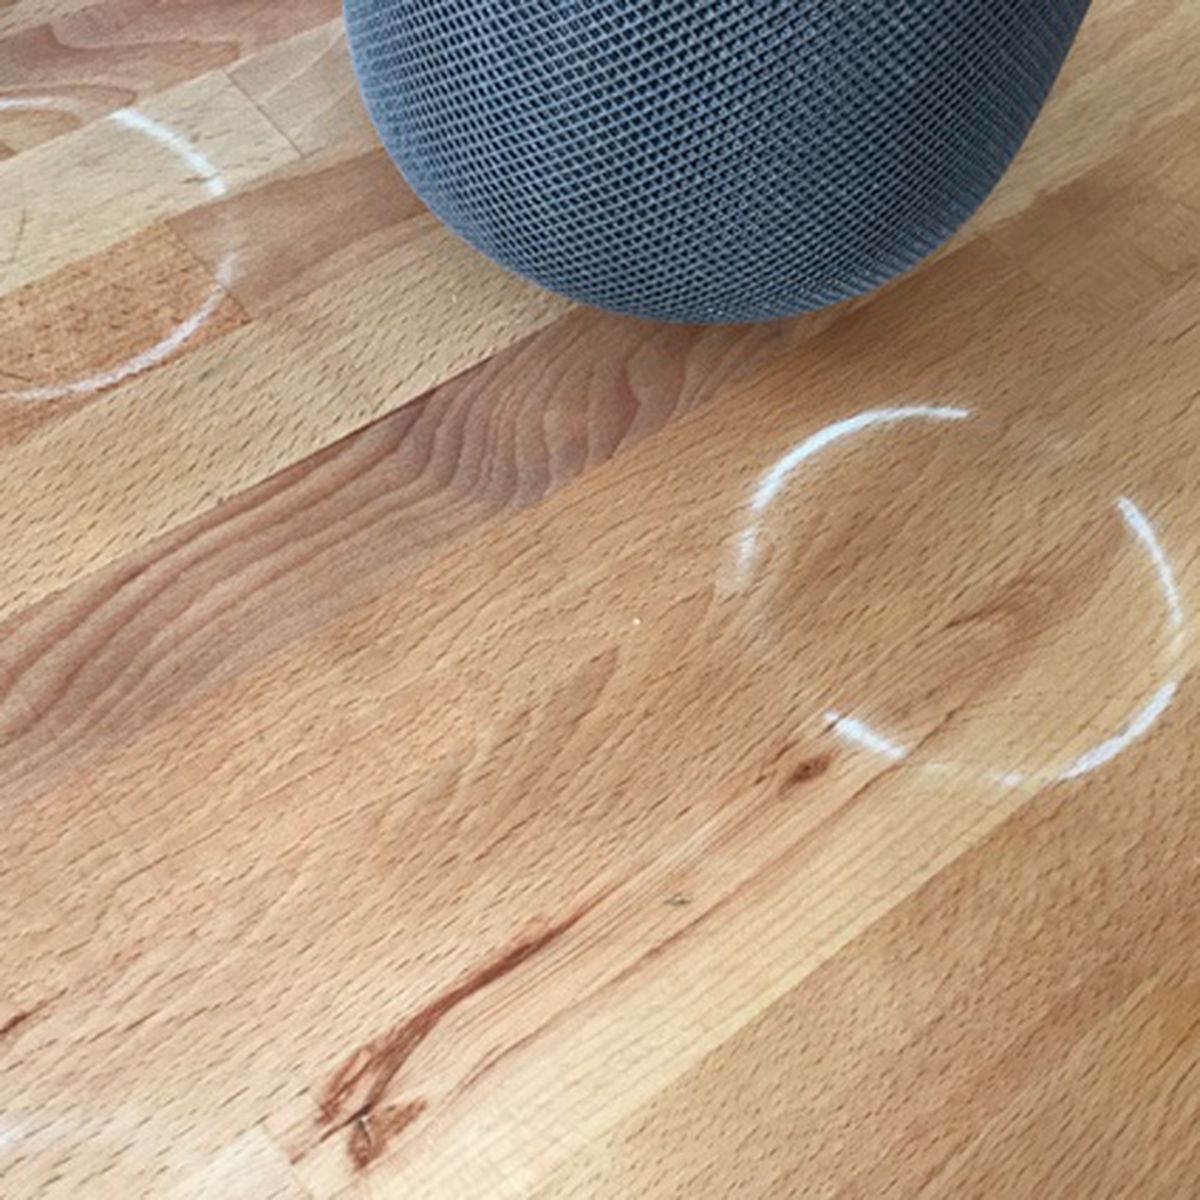 Apple Says HomePod Mini Won't Leave Marks on Waxed or Oiled Wood 